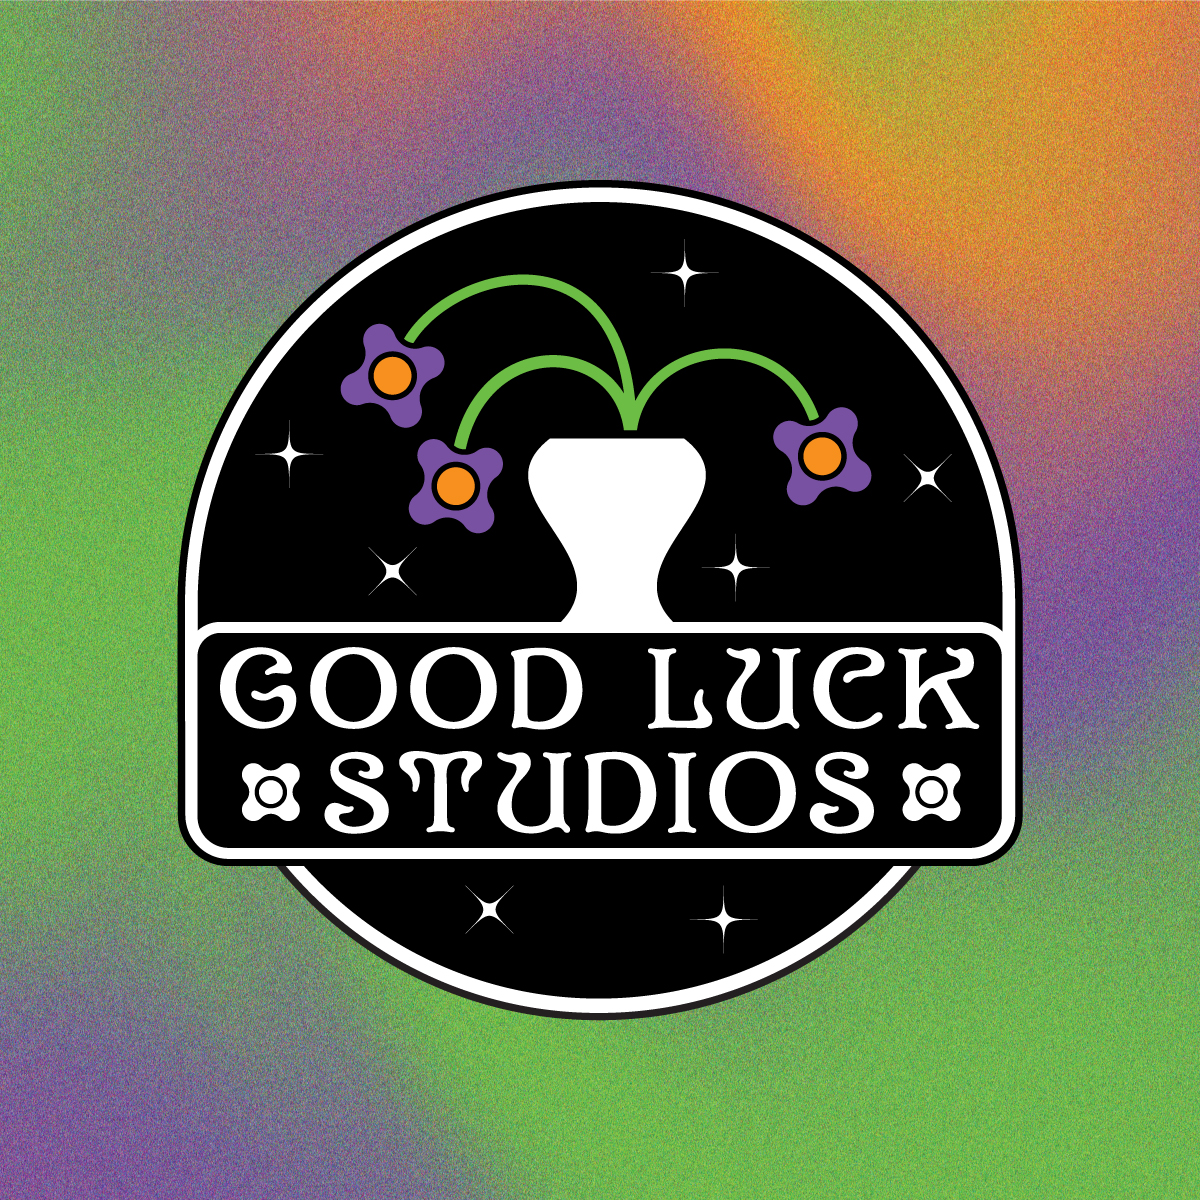 You are currently viewing Good Luck Studios